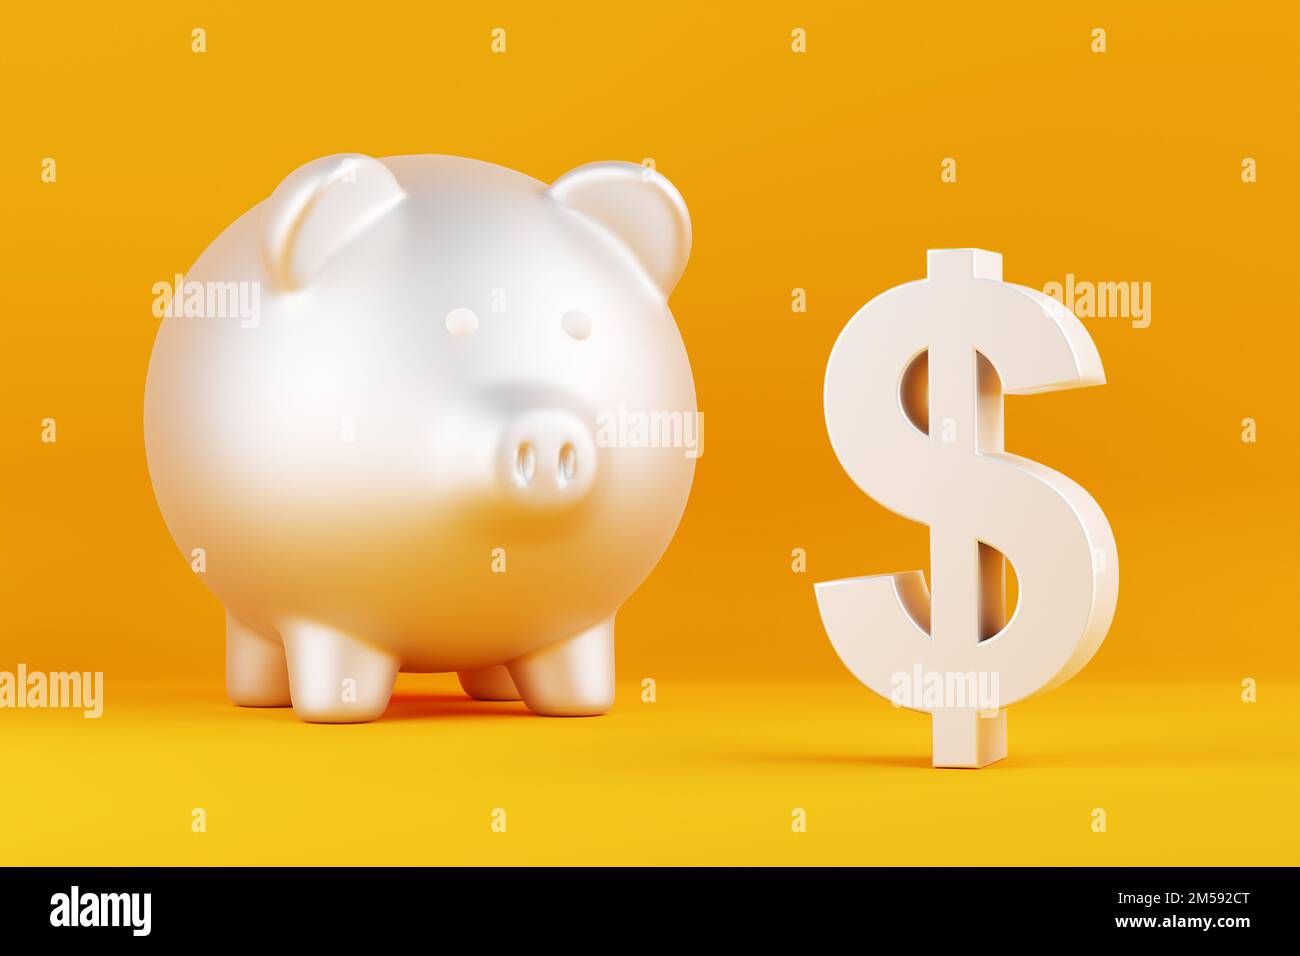 Piggy bank and US dollar symbol on yellow background. Saving money, financial investment and household budget concepts. 3D rendering. Stock Photo